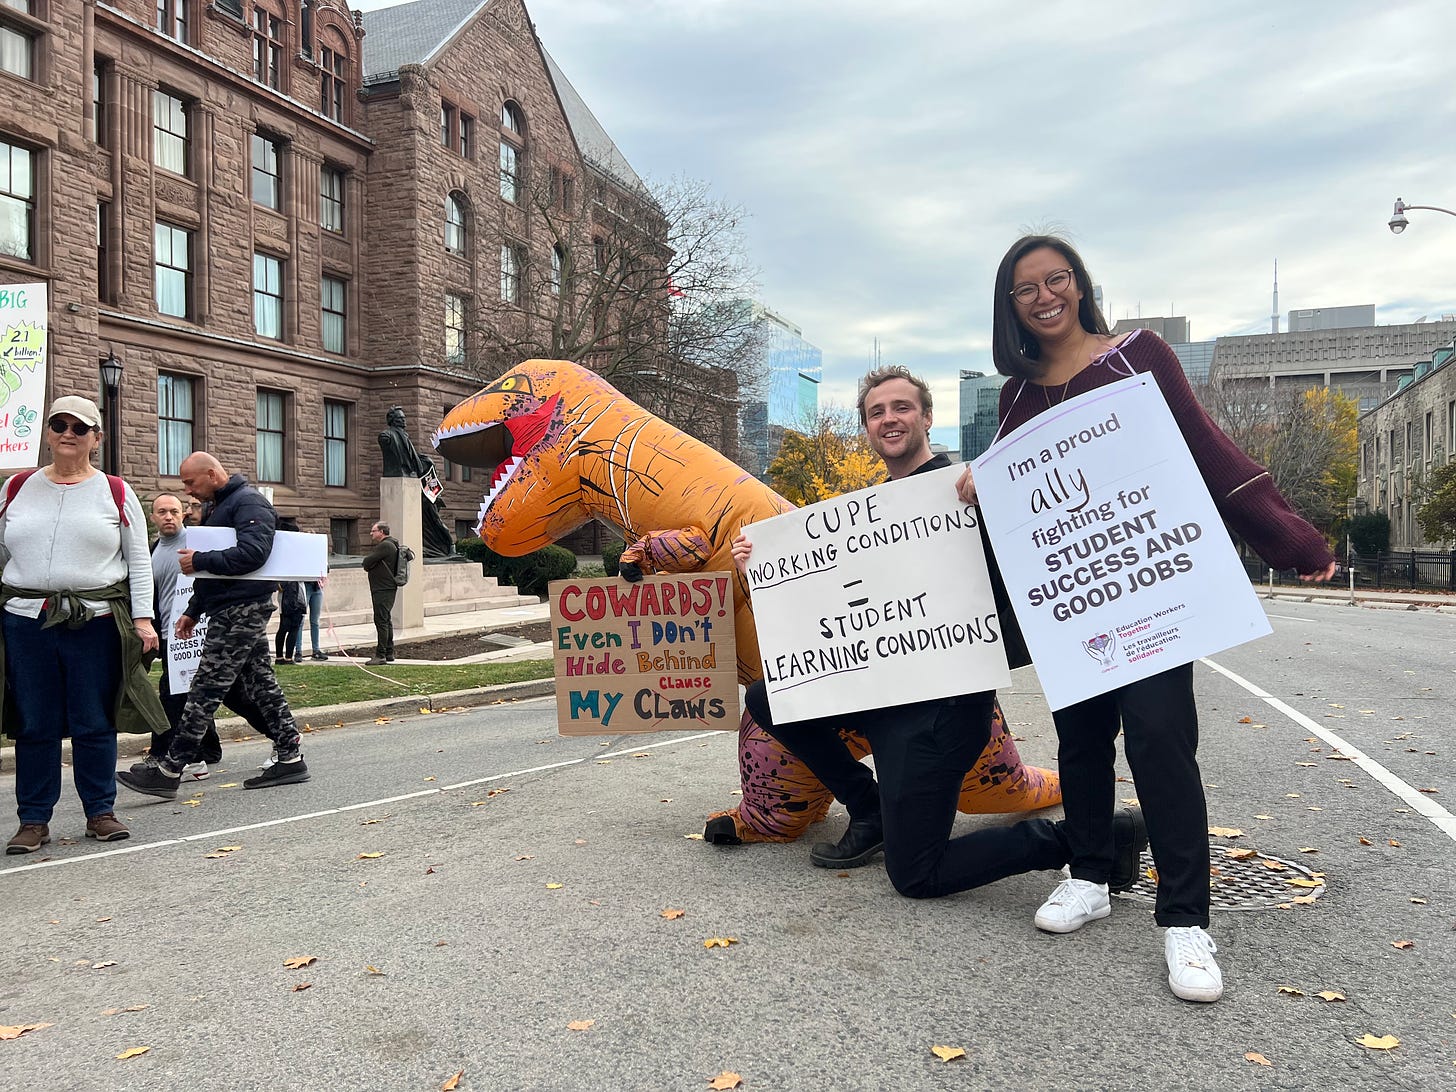 My partner and I standing next to the Provincial Parliament with signs in support of education workers. There is also a person in a dinosaur costume next to us.